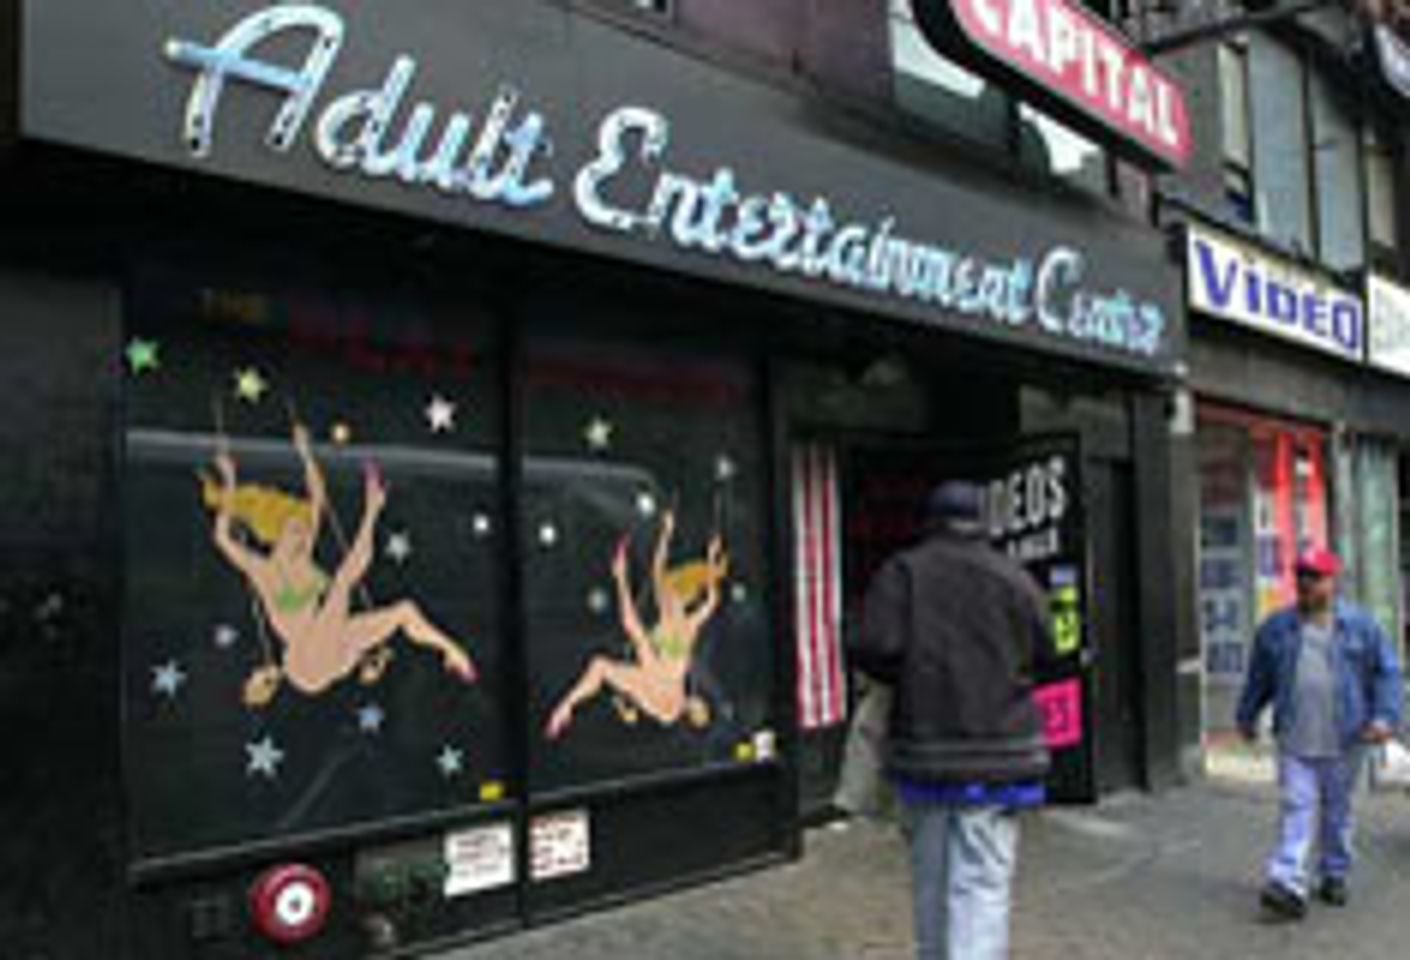 Adult Booths in New York Store Shuttered